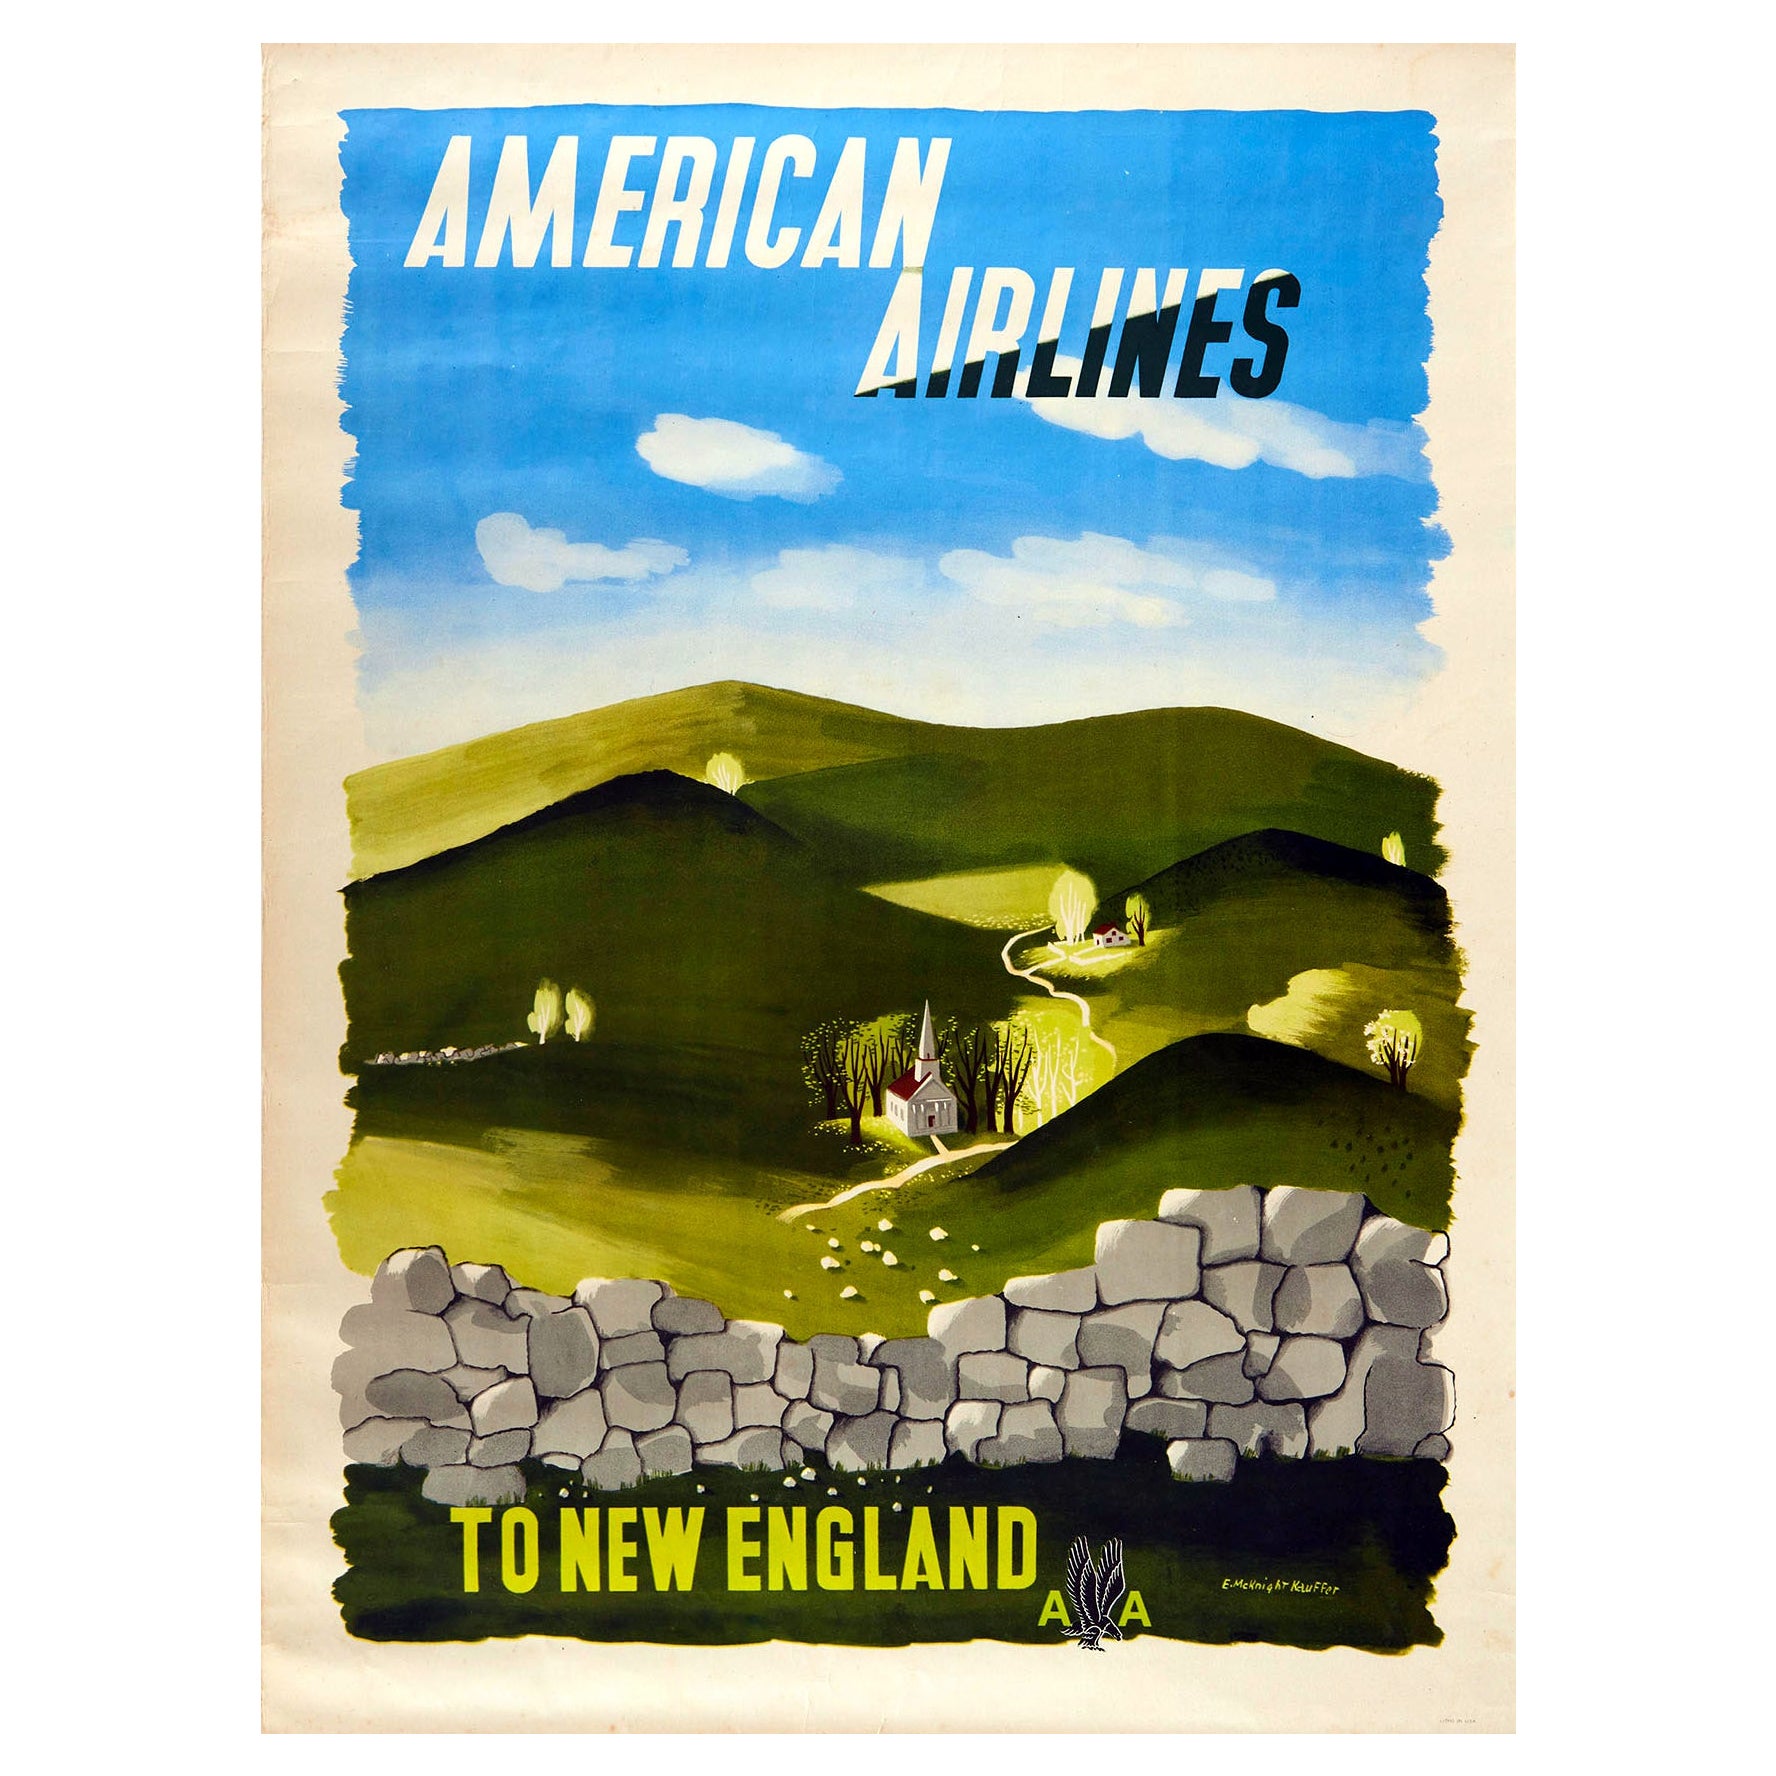 Original Vintage Travel Poster American Airlines To New England McKnight Kauffer